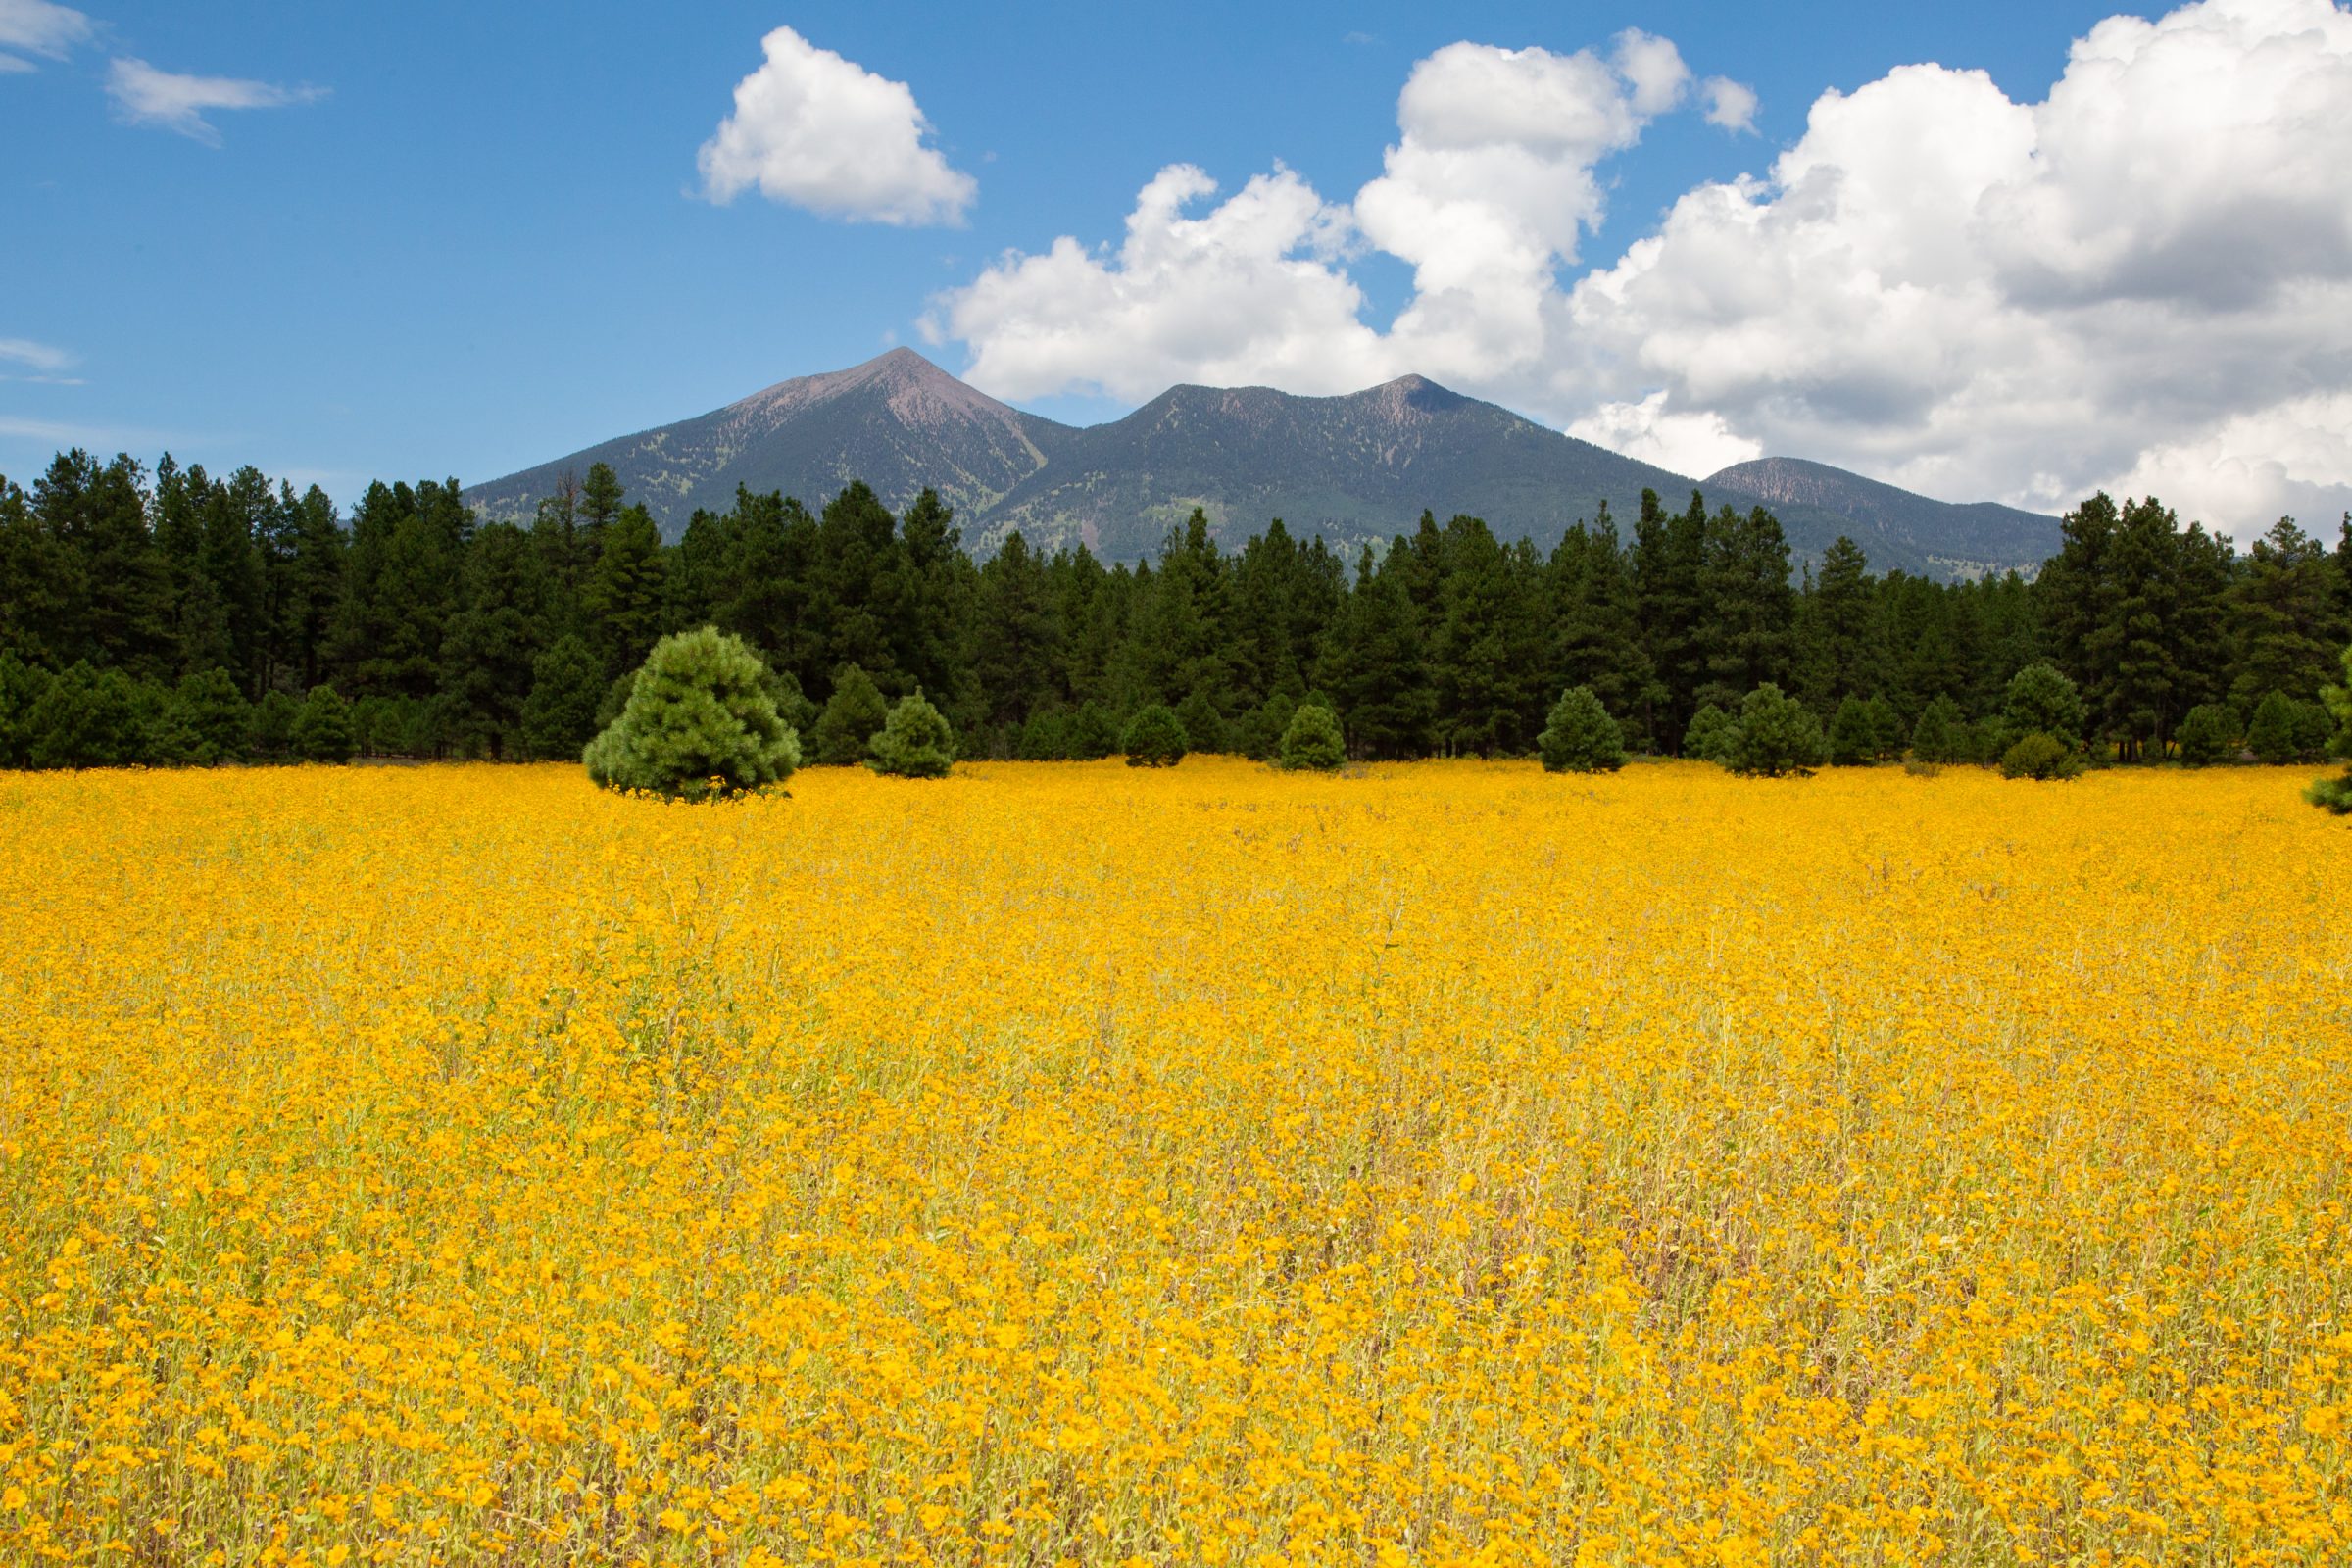 A field of yellow flowers with pine trees and the San Fransisco Peaks in the background